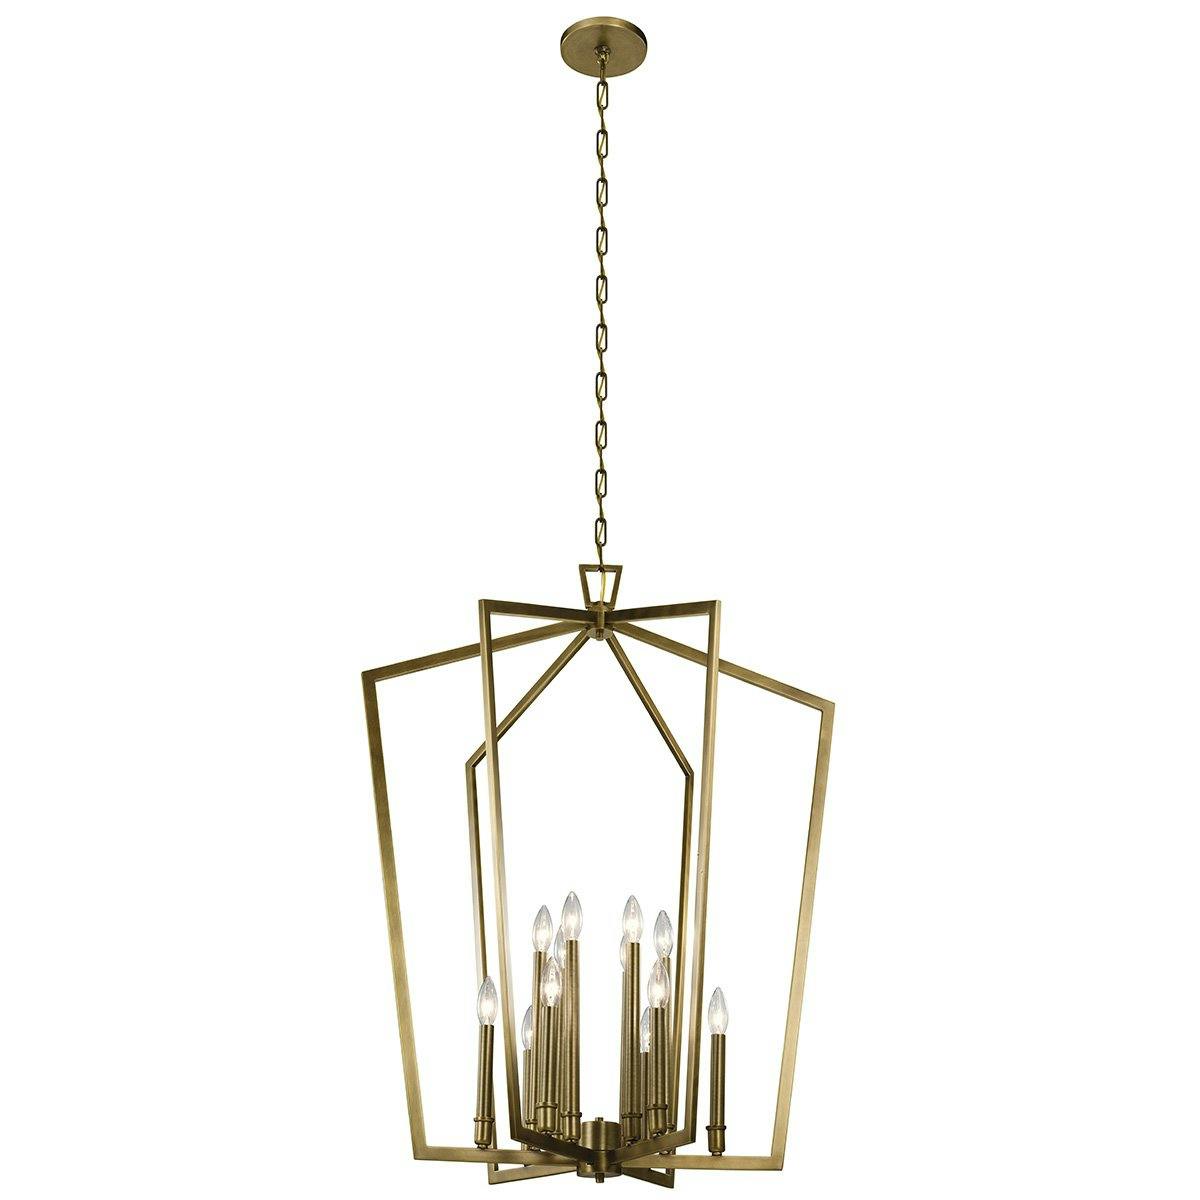 Abbotswell 30" 12 Light Chandelier Brass on a white background